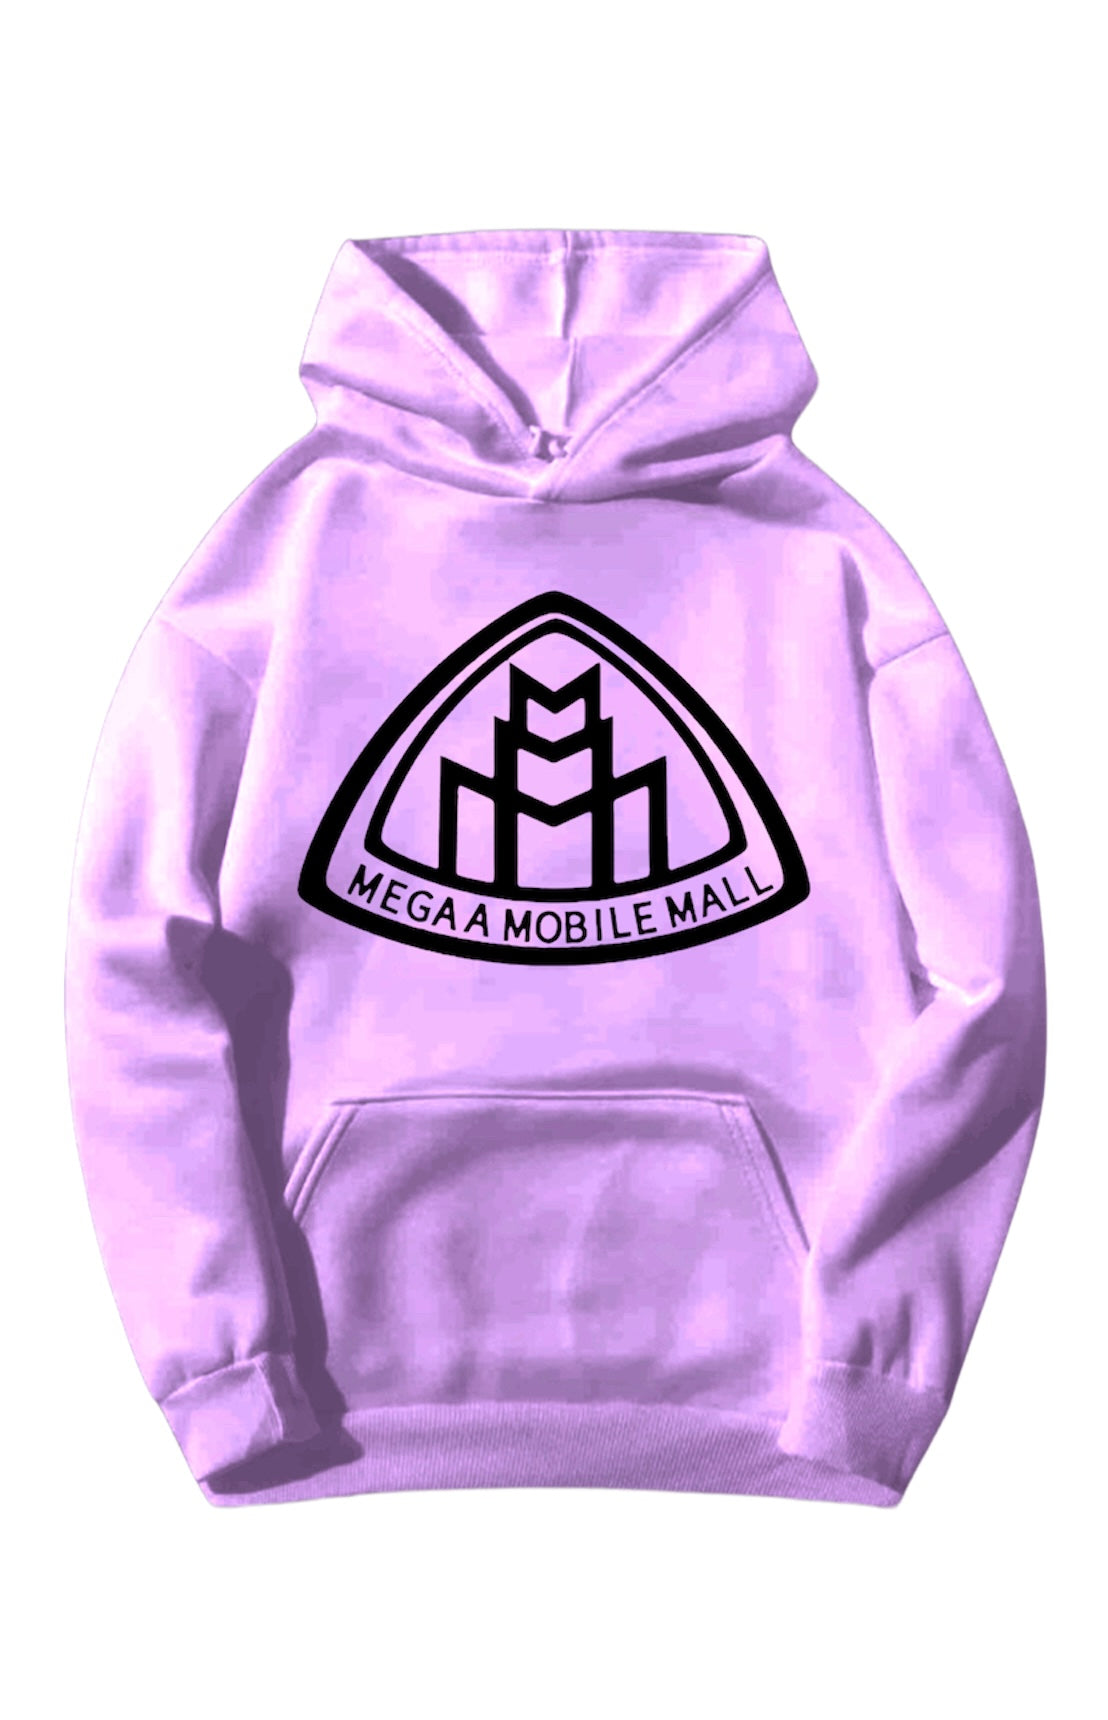 lilac megaamobilemall logo Heavy Blend Fleece Hoodie with black logo